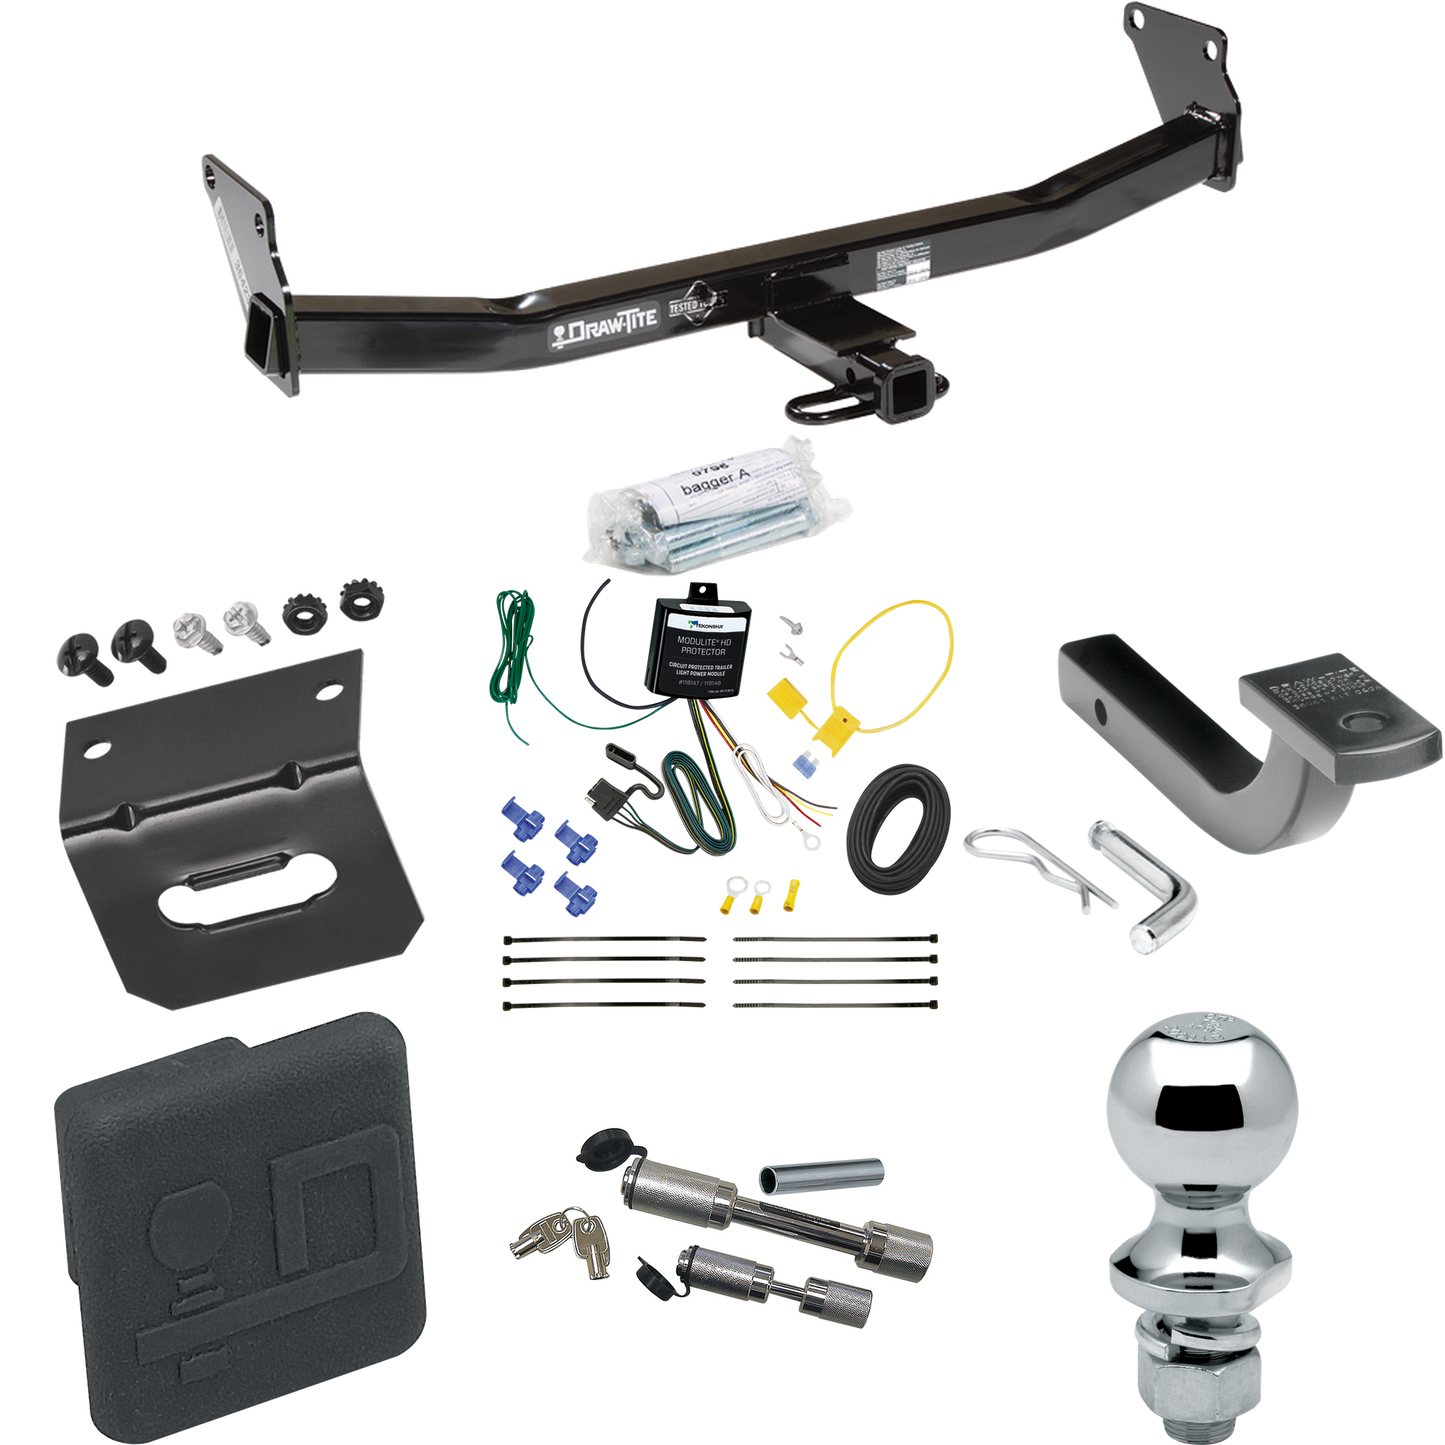 Fits 2007-2007 Jeep Patriot Trailer Hitch Tow PKG w/ 4-Flat Wiring Harness + Draw-Bar + 1-7/8" Ball + Wiring Bracket + Hitch Cover + Dual Hitch & Coupler Locks By Draw-Tite